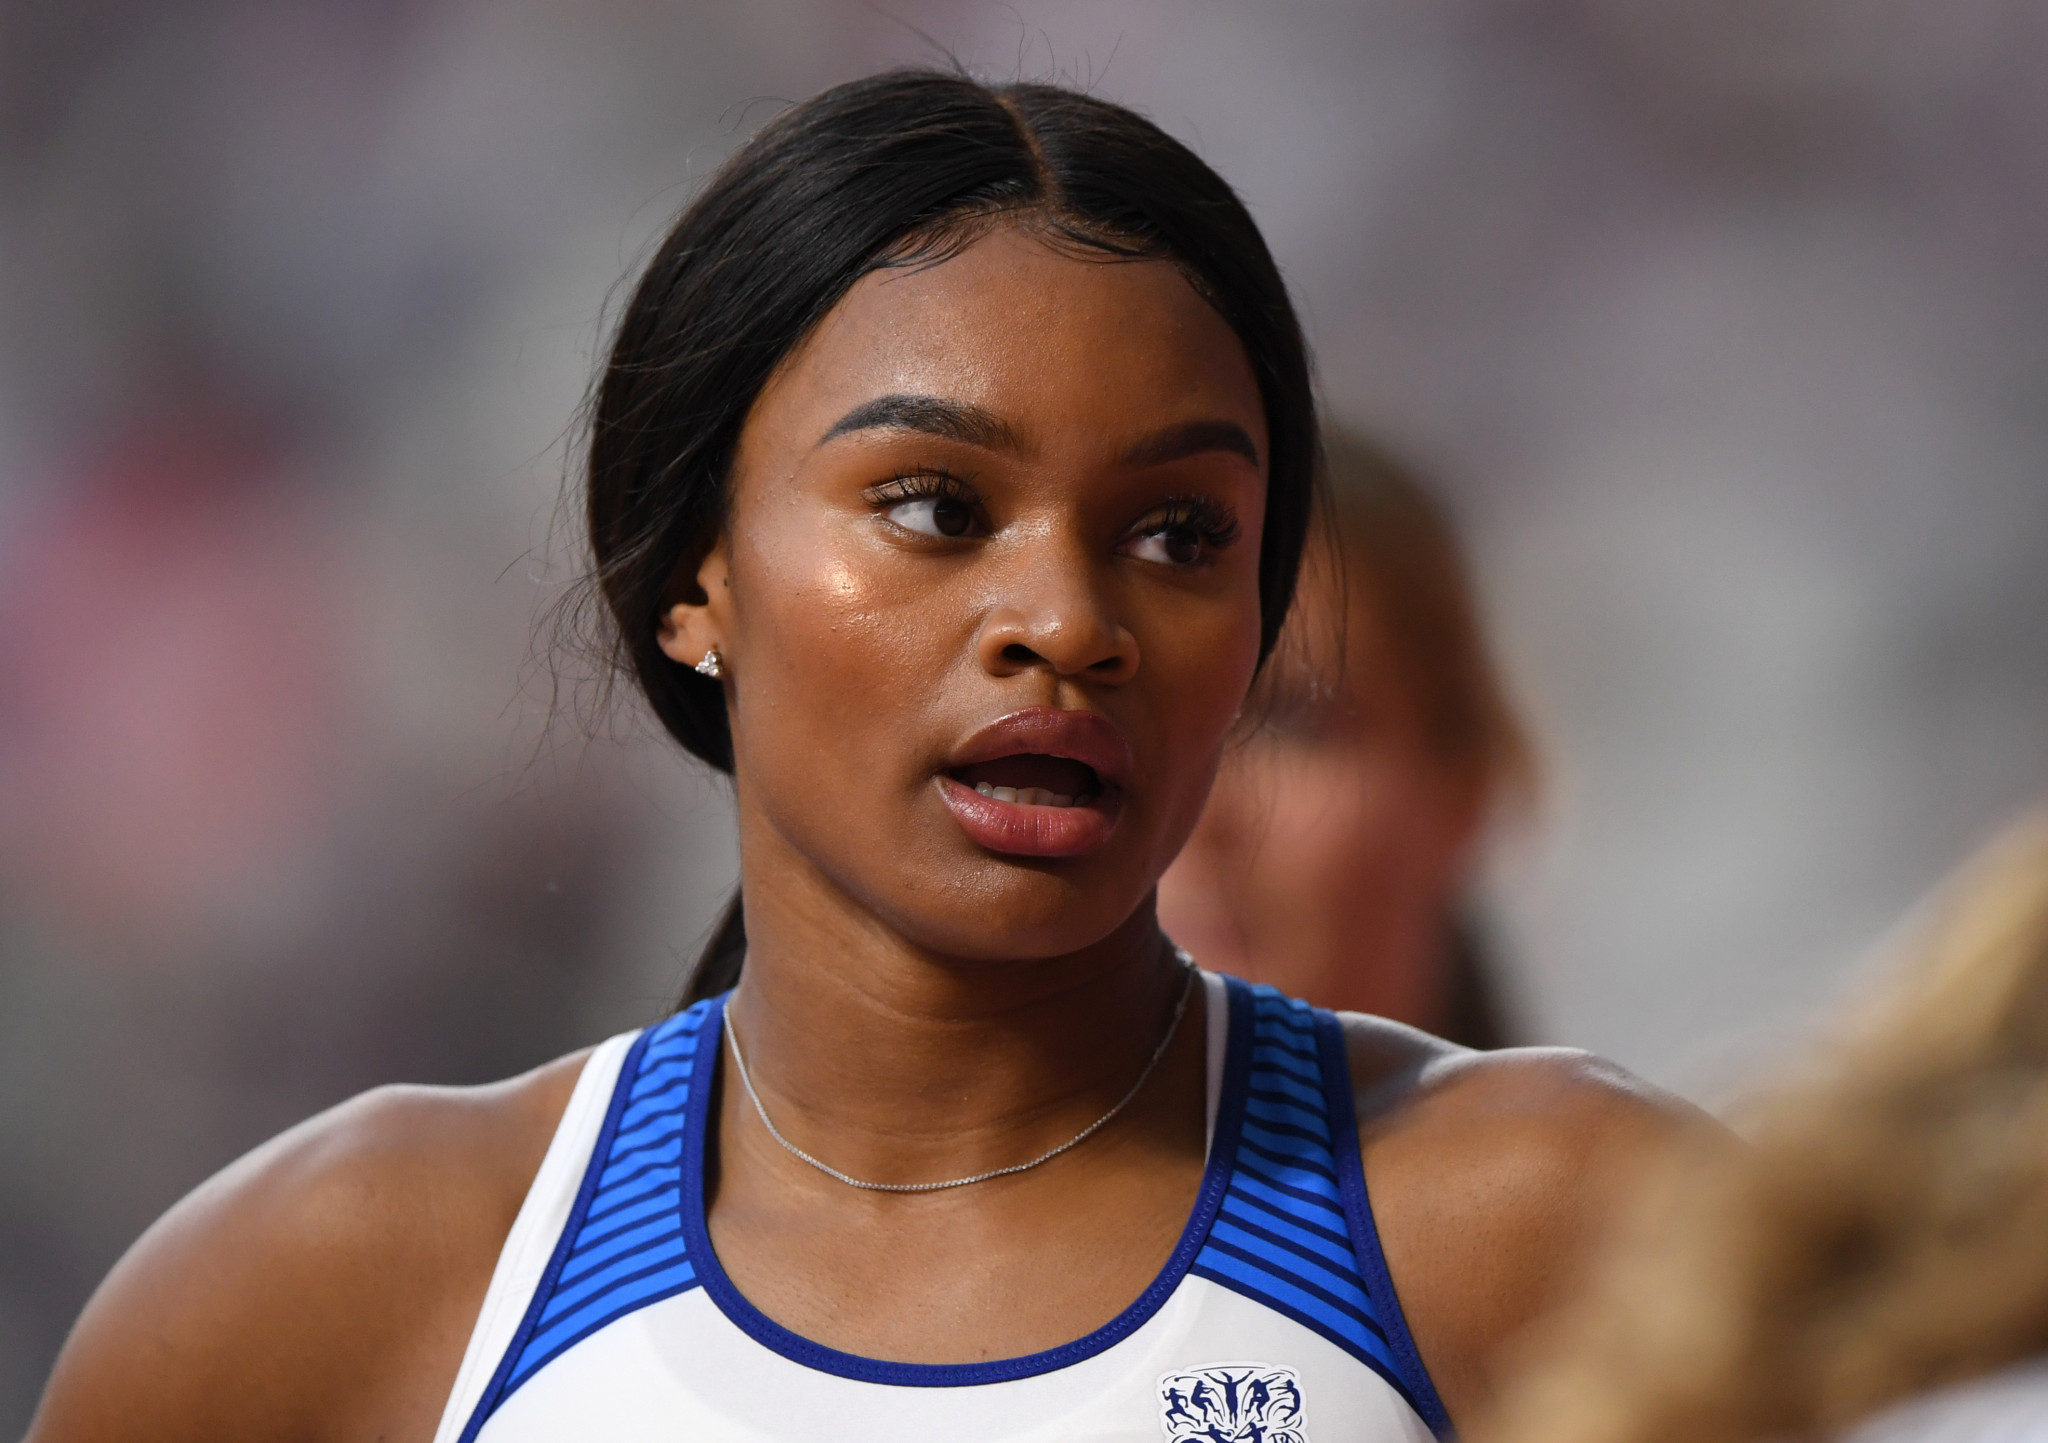 Imani-Lara Lansiquot was the first athlete representative appointed last month ©Getty Images